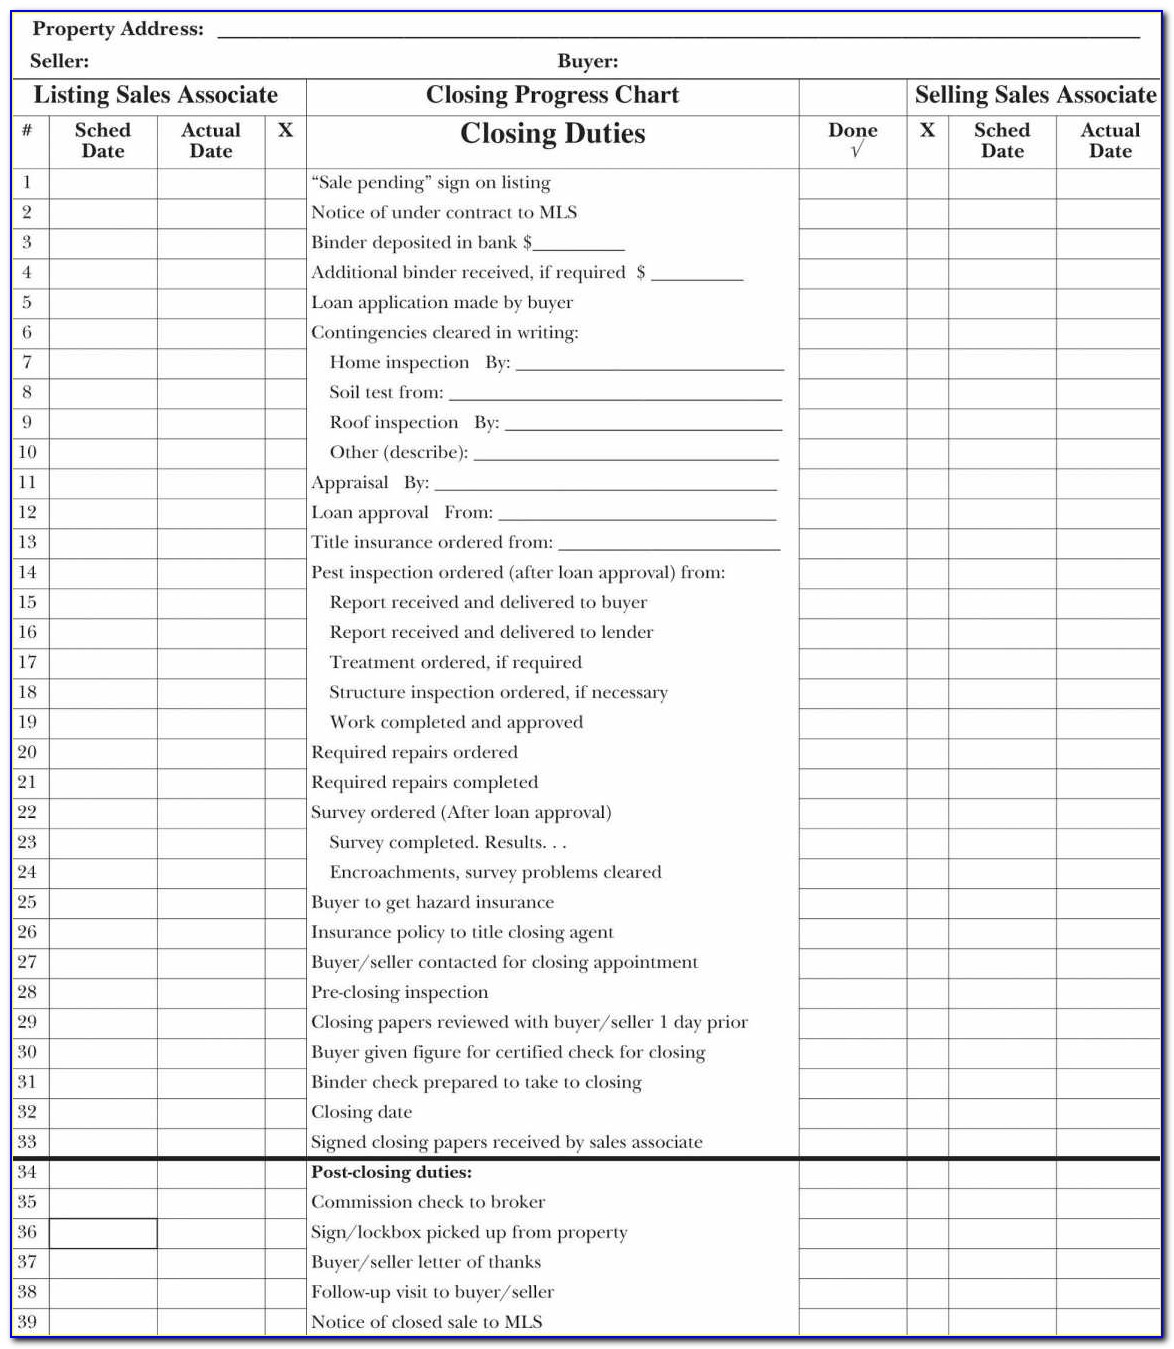 Estate Property Inventory Template